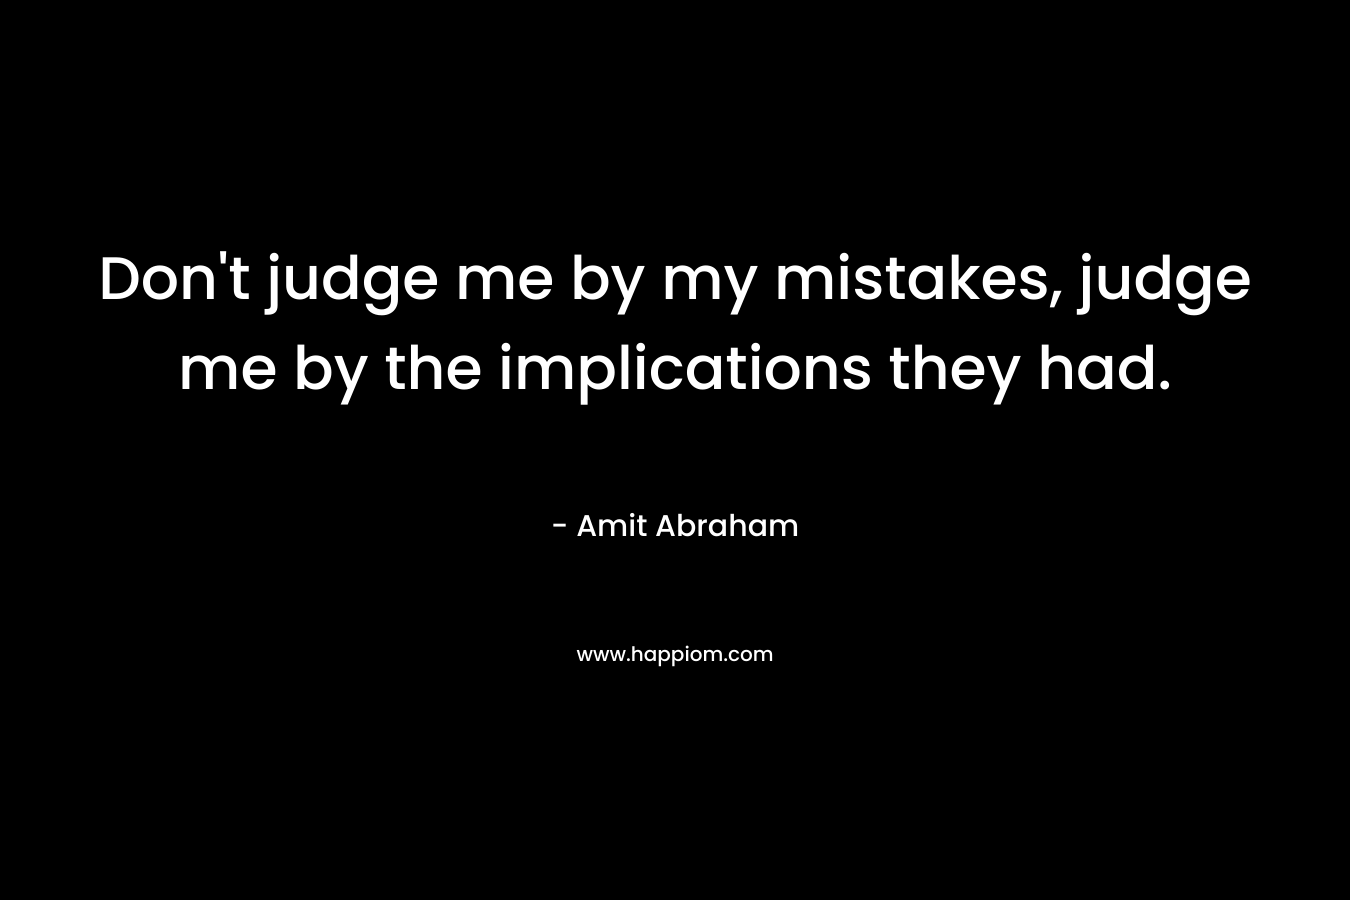 Don't judge me by my mistakes, judge me by the implications they had.